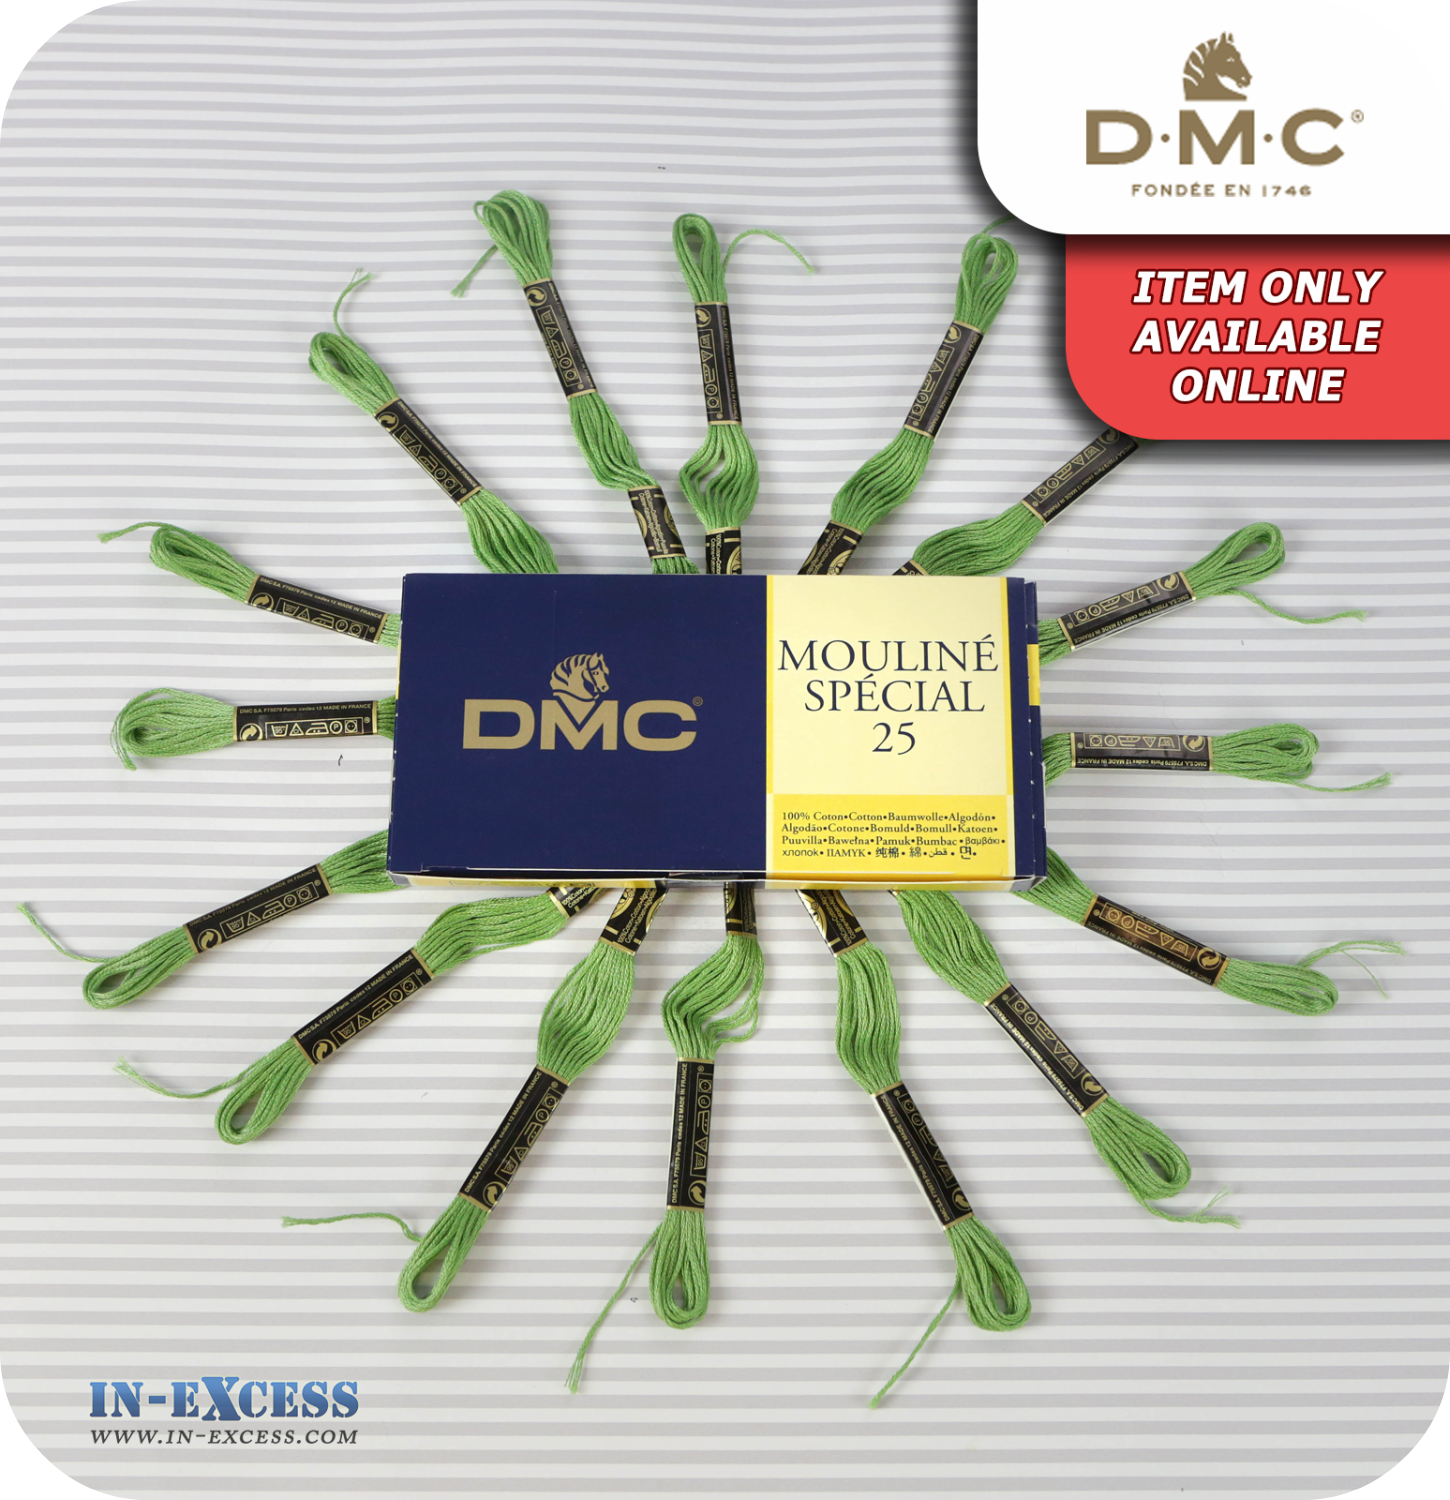 DMC Mouliné Special 25 Cotton Thread - Pack of 16 Skeins (989 Forest Green)